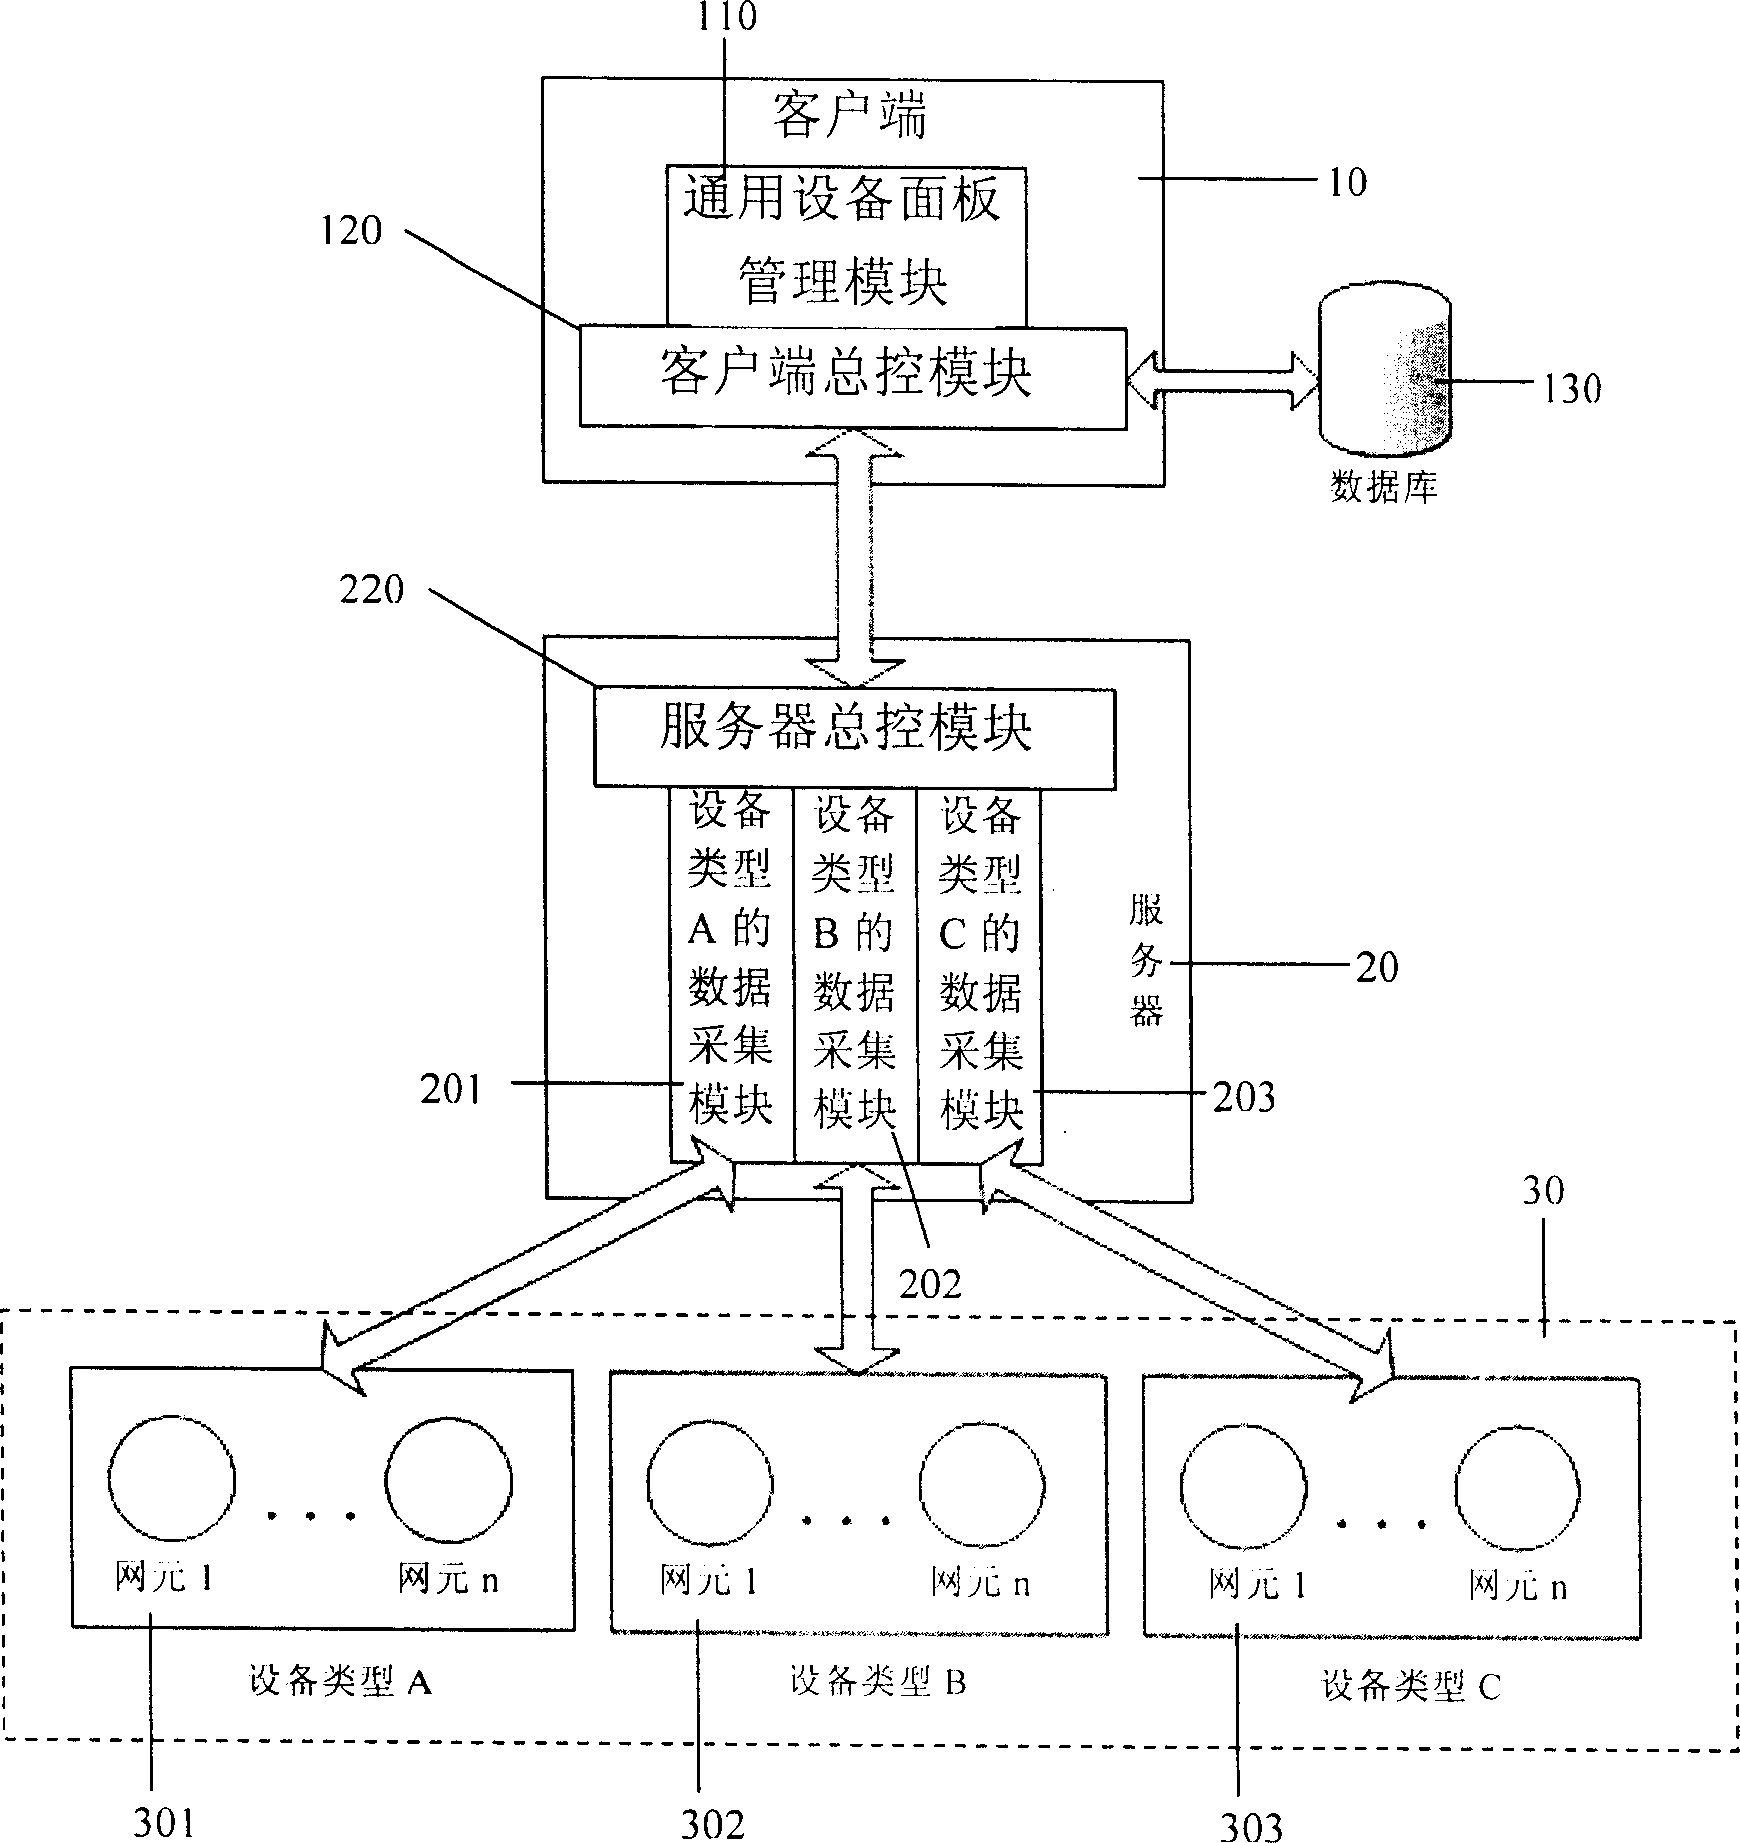 Faceplate management system for telecom device, and implementation method